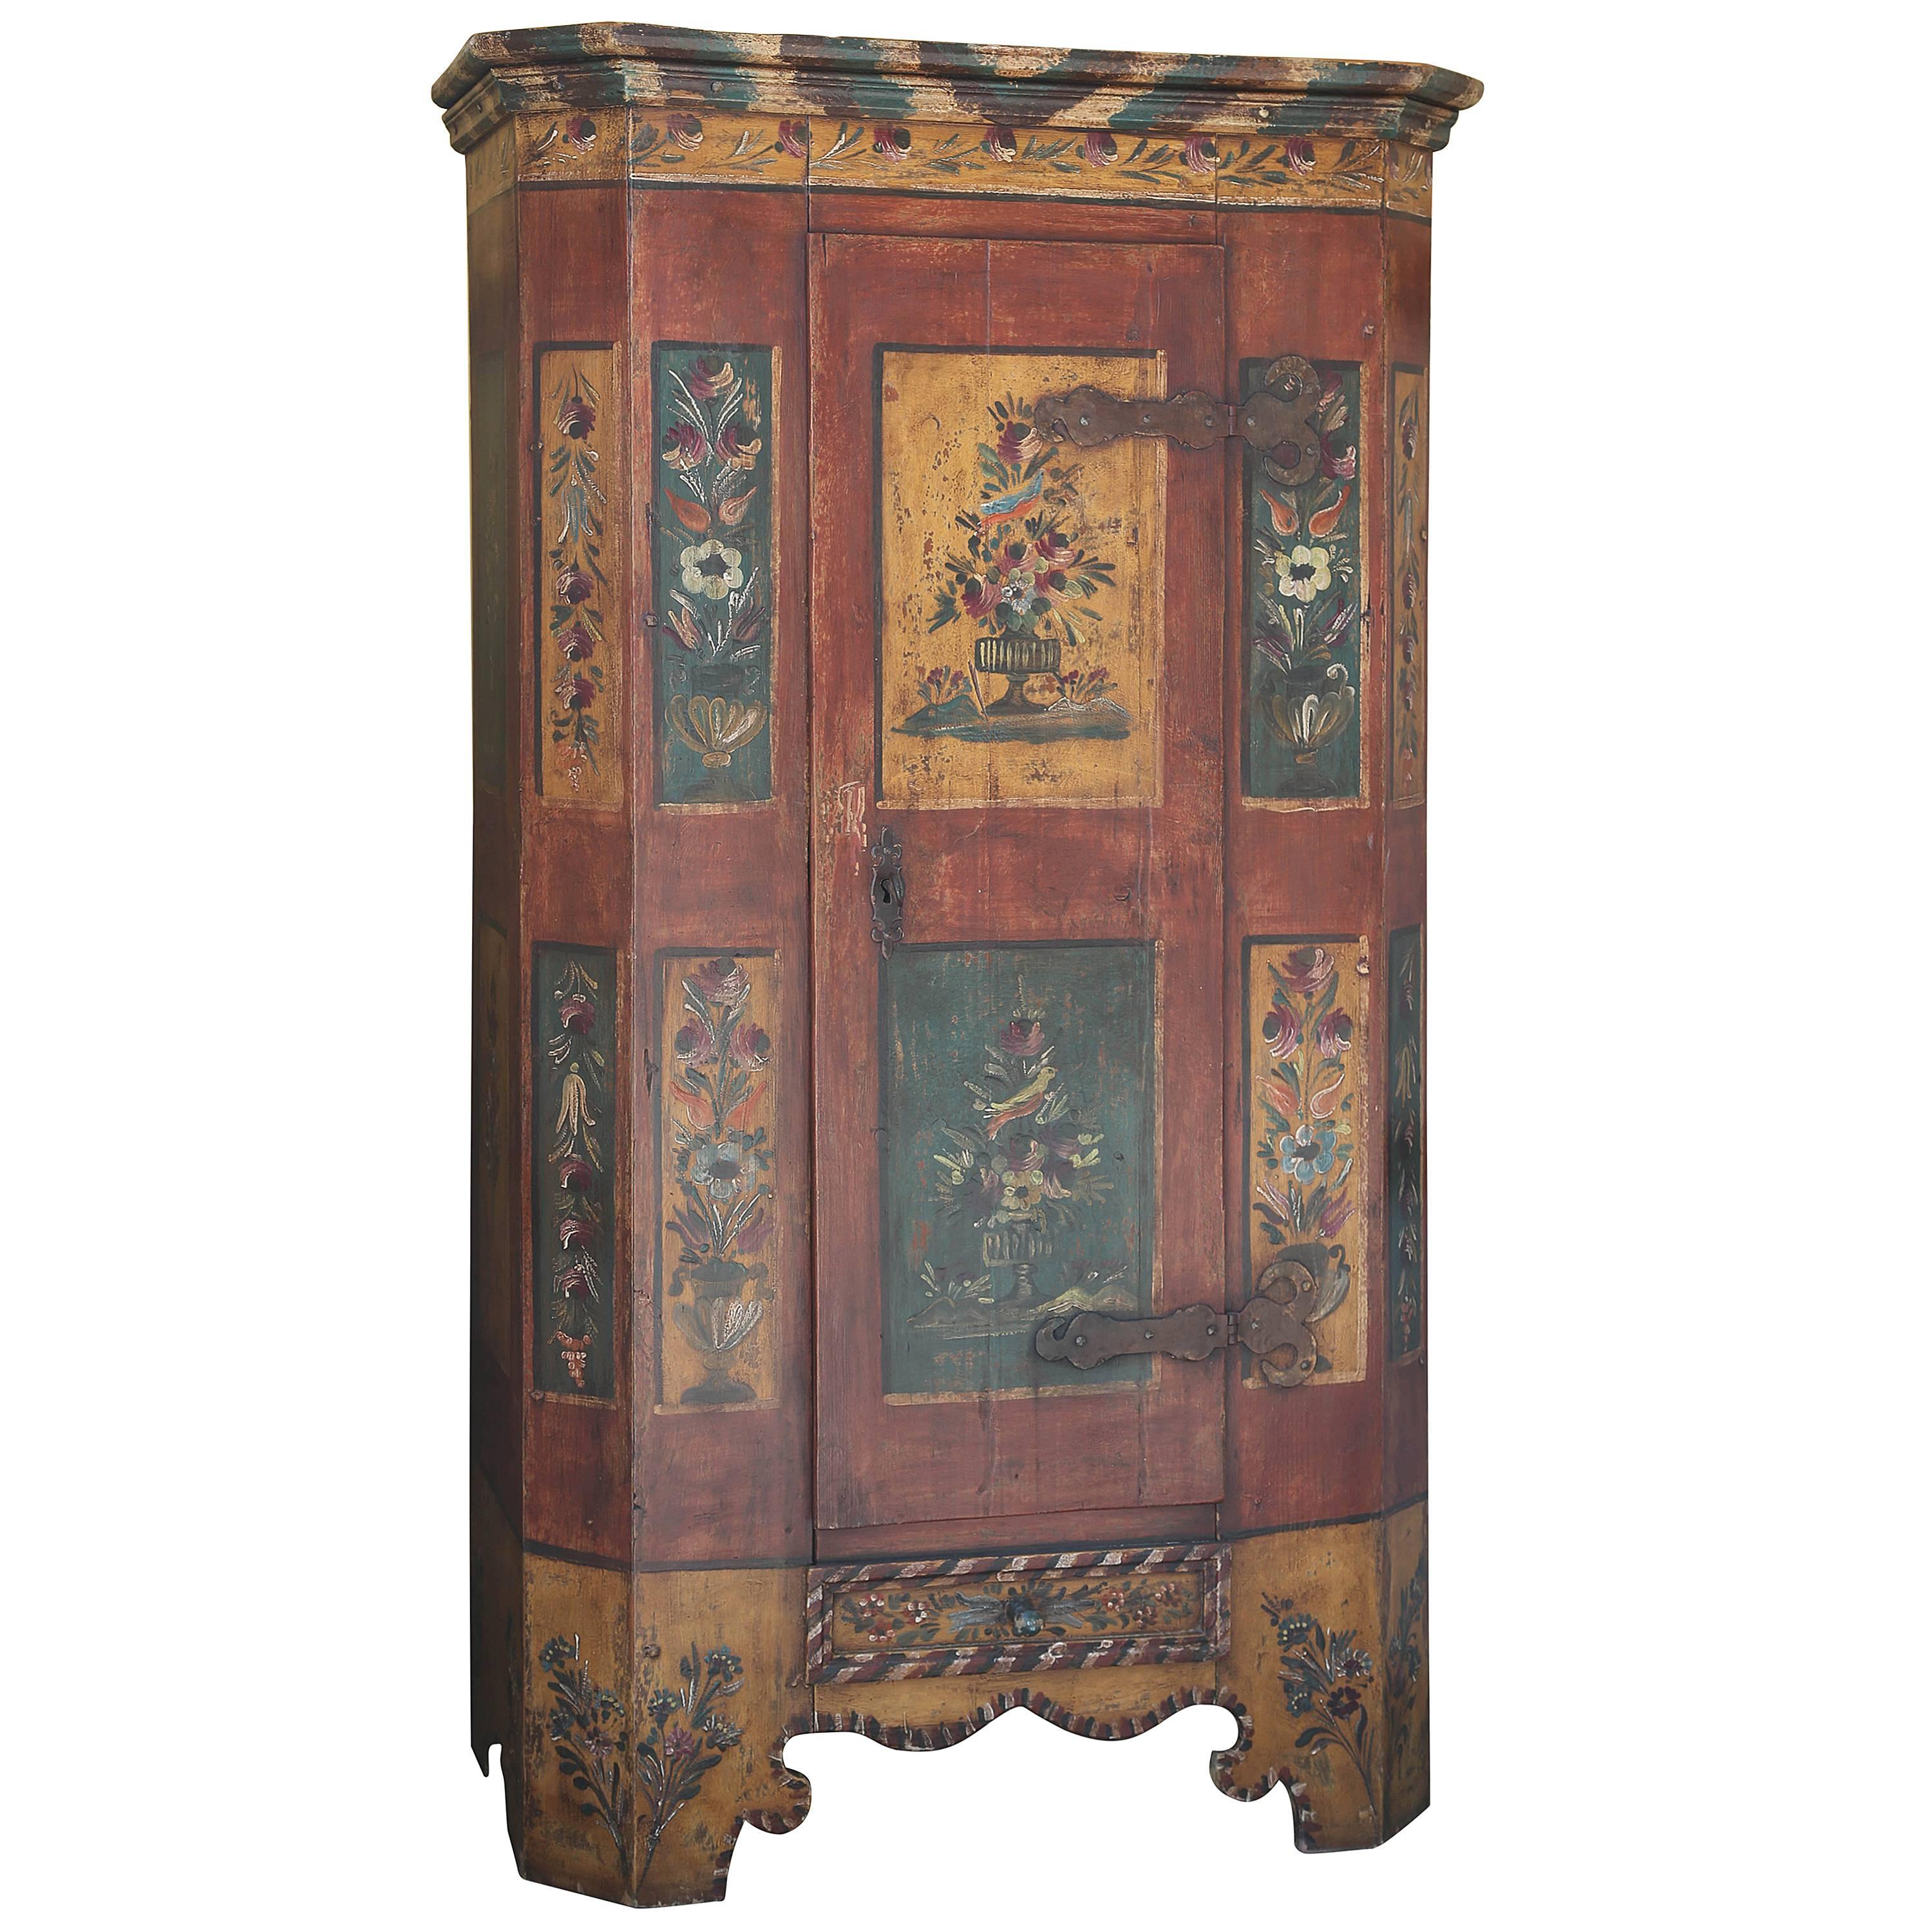 Superb 19th Century Hand-Painted Italian Armoire